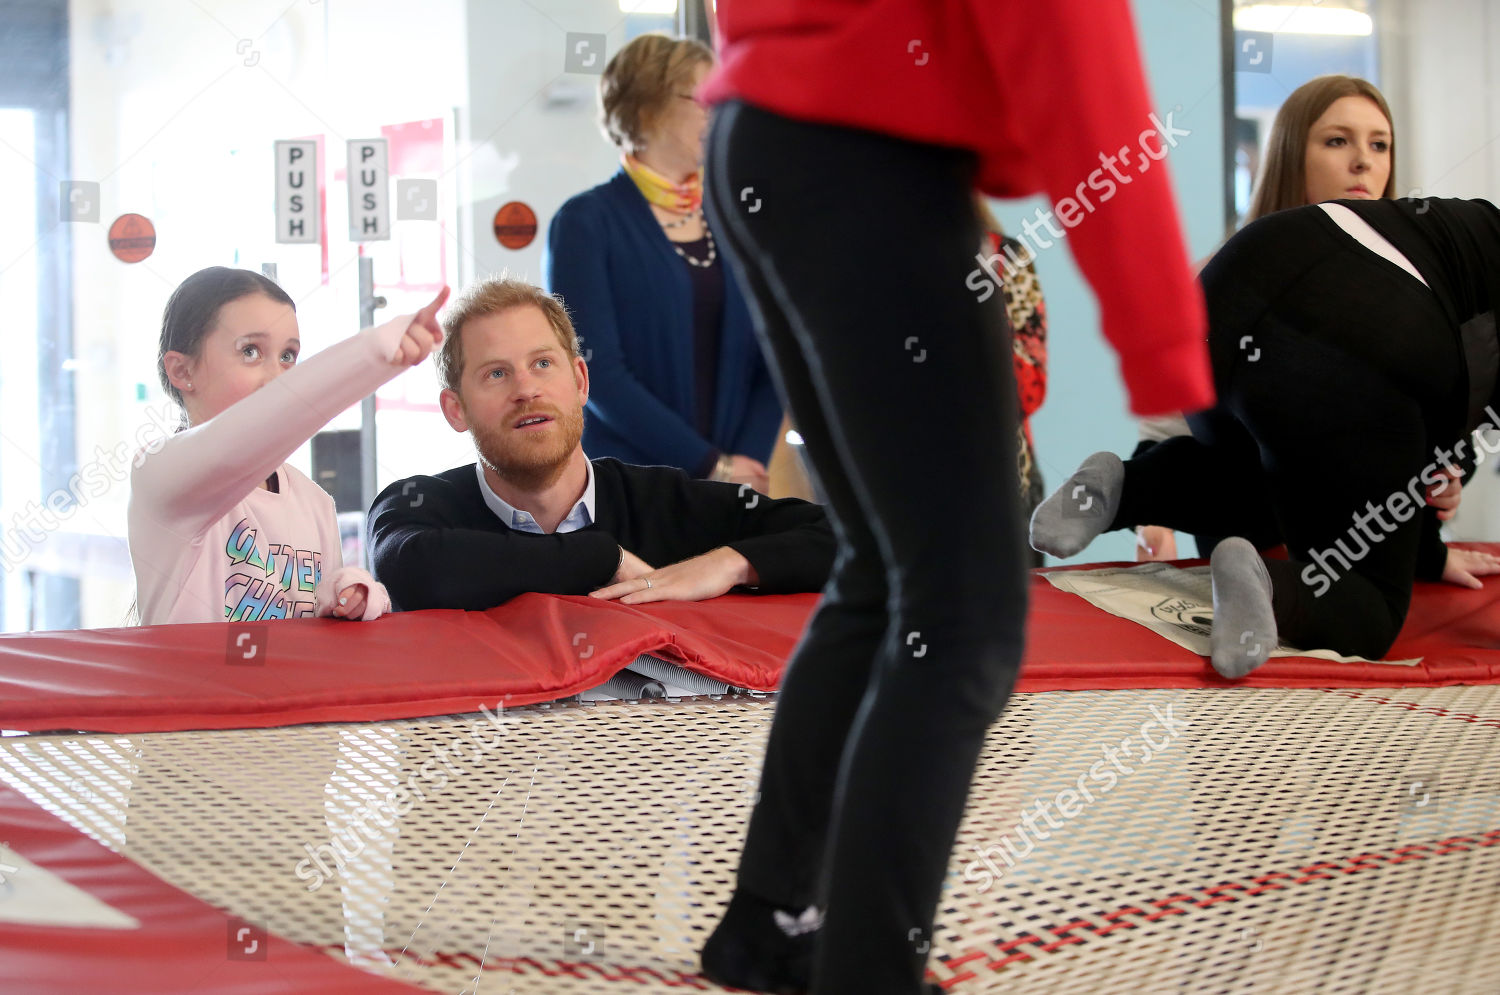 prince-harry-visit-to-fit-and-fed-half-term-initiative-streatham-london-uk-shutterstock-editorial-10110713g.jpg